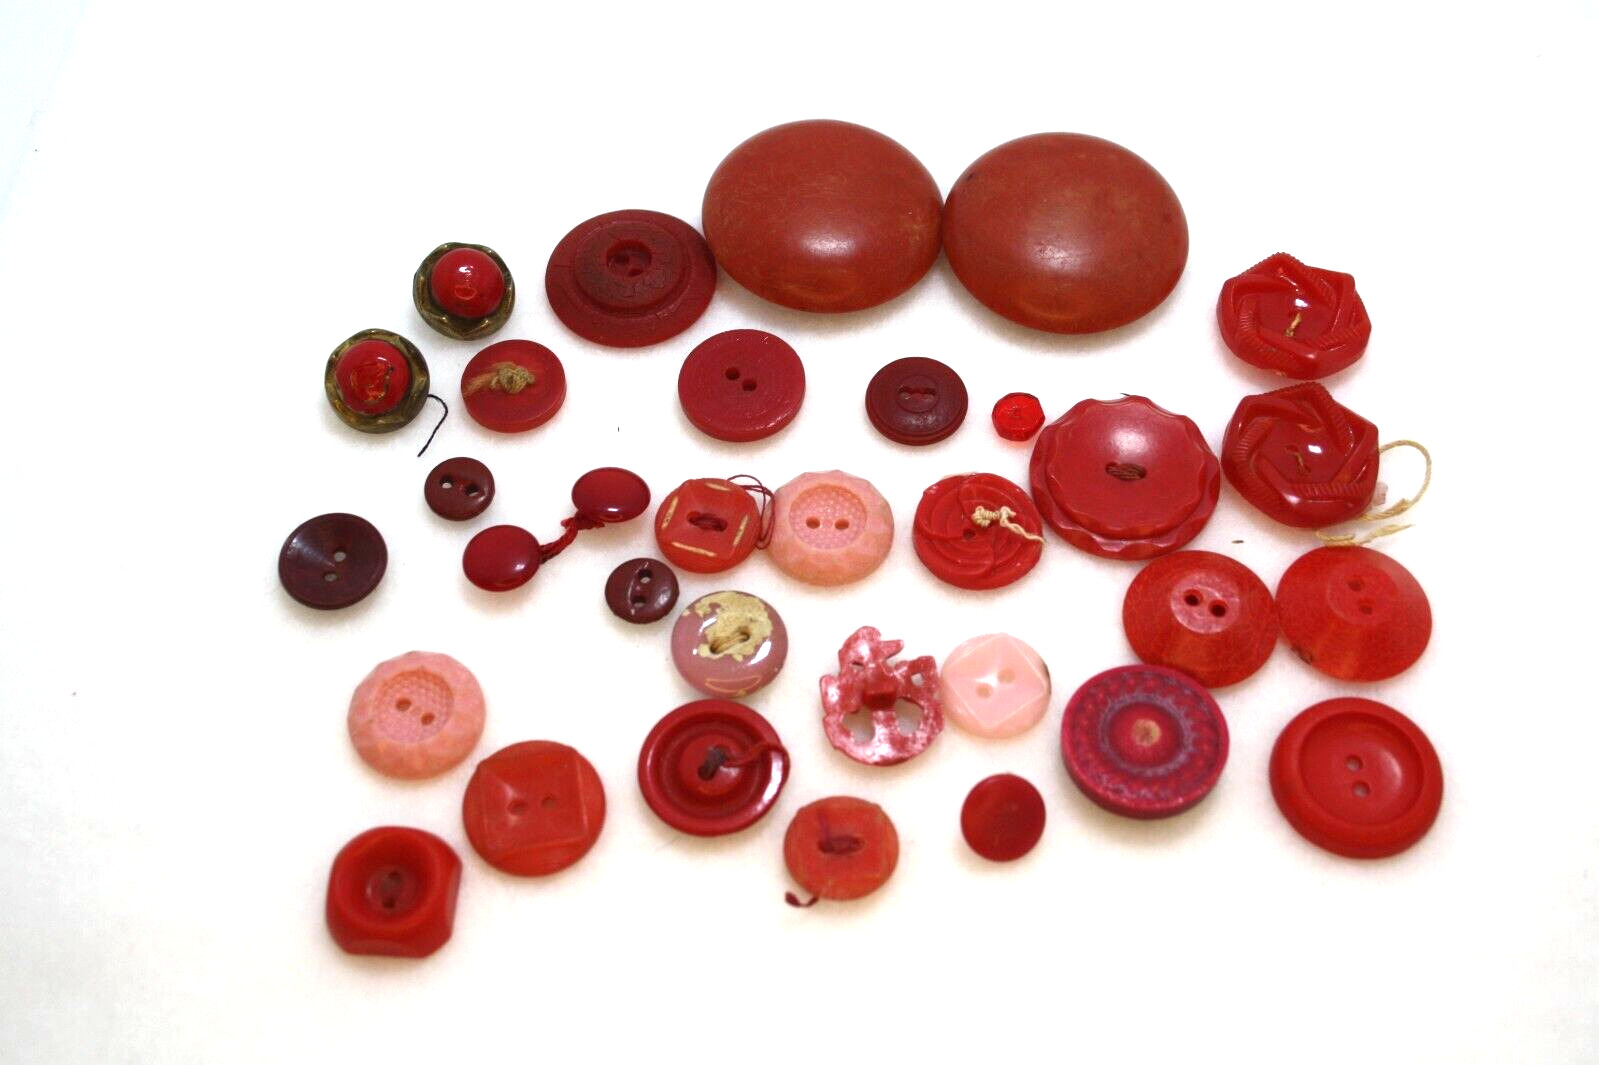 Vintage Mixed Bag of Shades of Red Buttons Small to Large